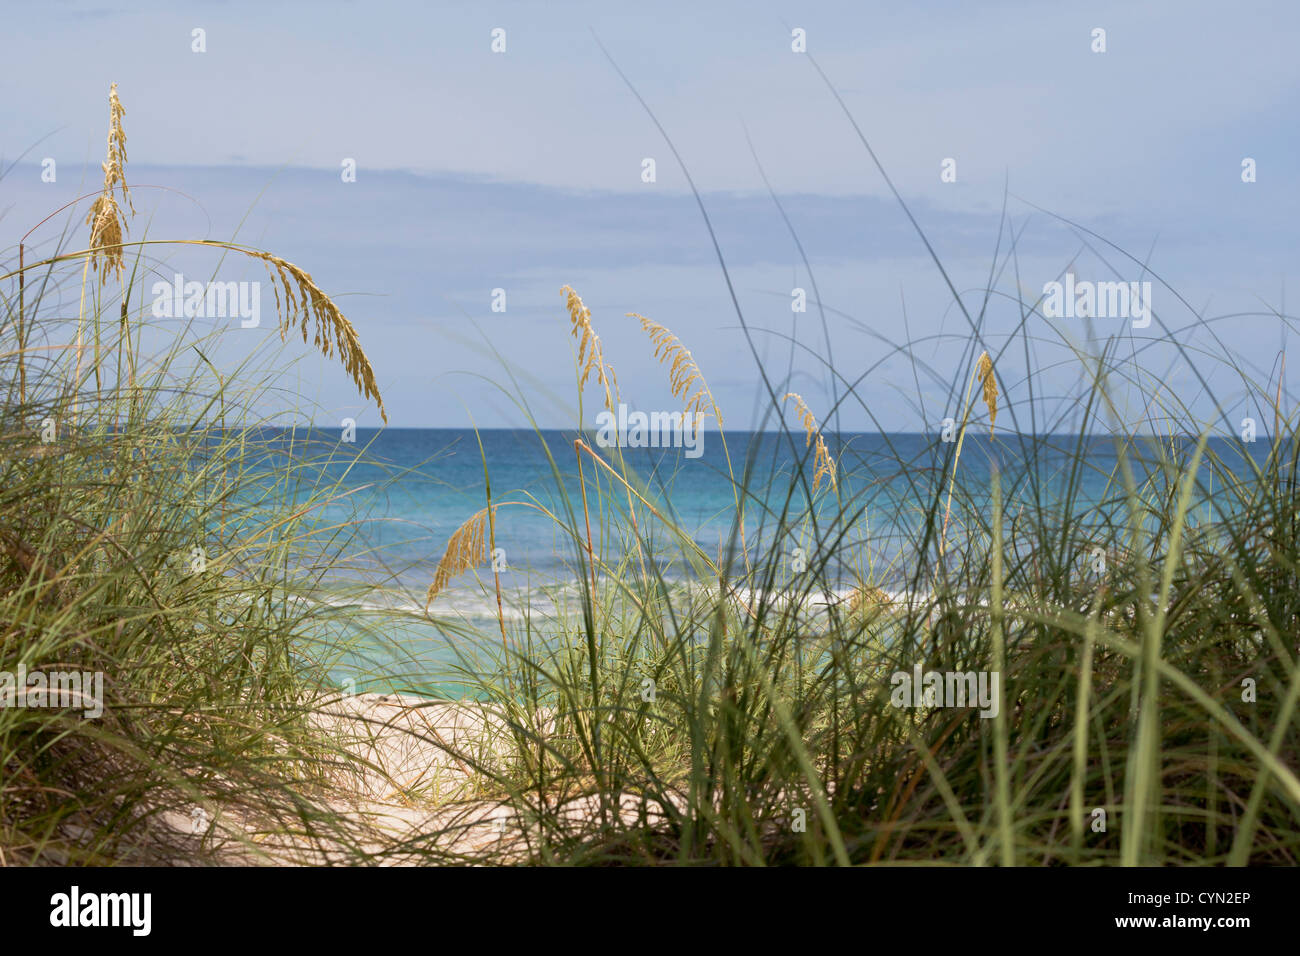 A view of a beach in the Caribbean looking through some tall grass. Stock Photo